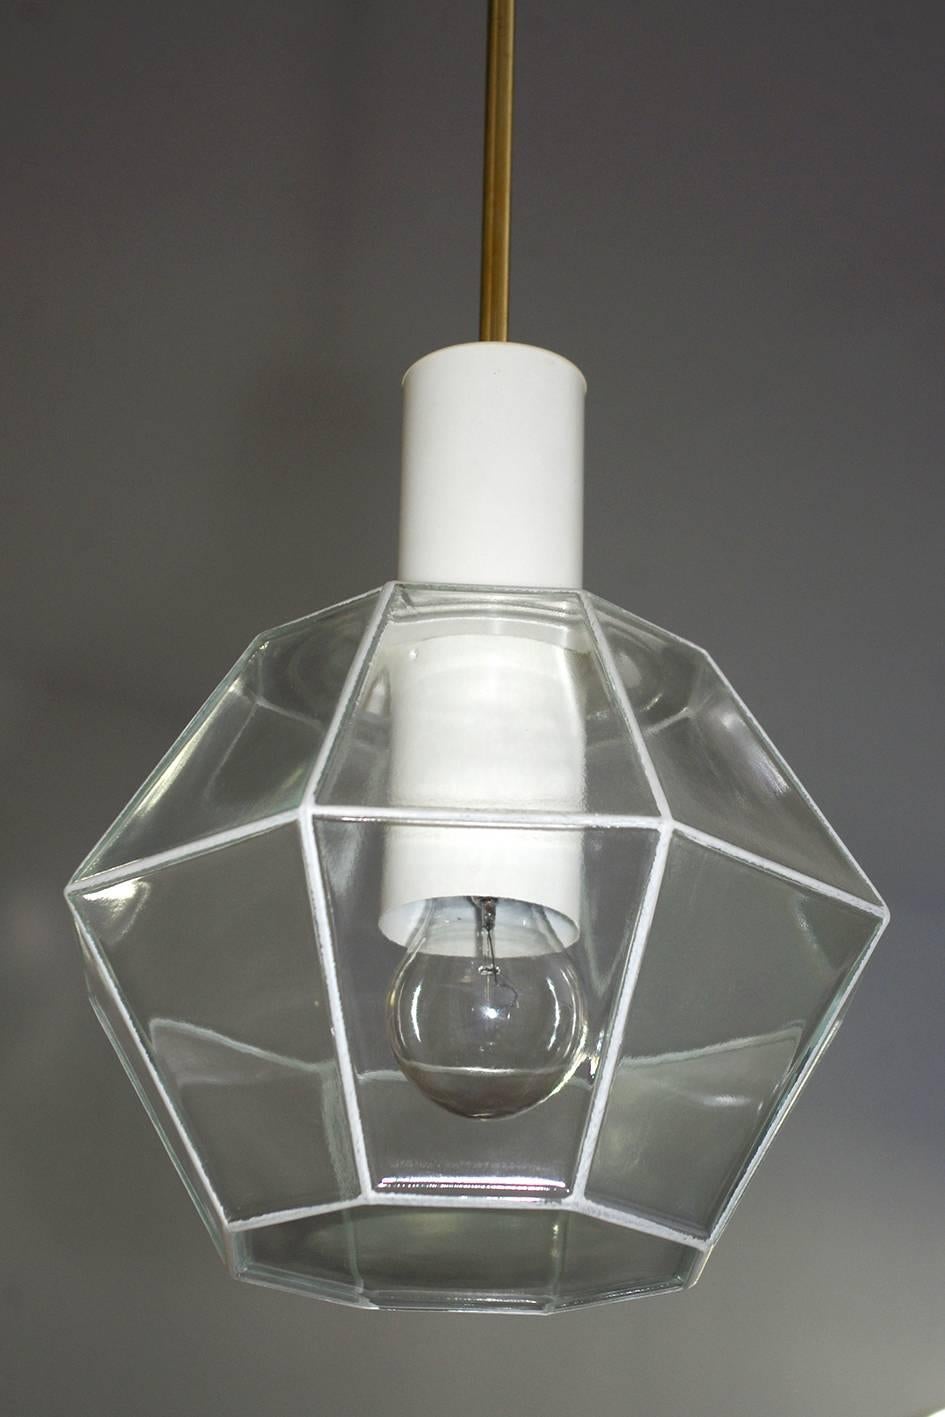 Pair of hand blown glass and white lacquered metal pendants (or flush mounts on request).
Germany, 1960s.
Lamp sockets: 1x E27 (US E26)
Height (body): 12 In (30 cm)